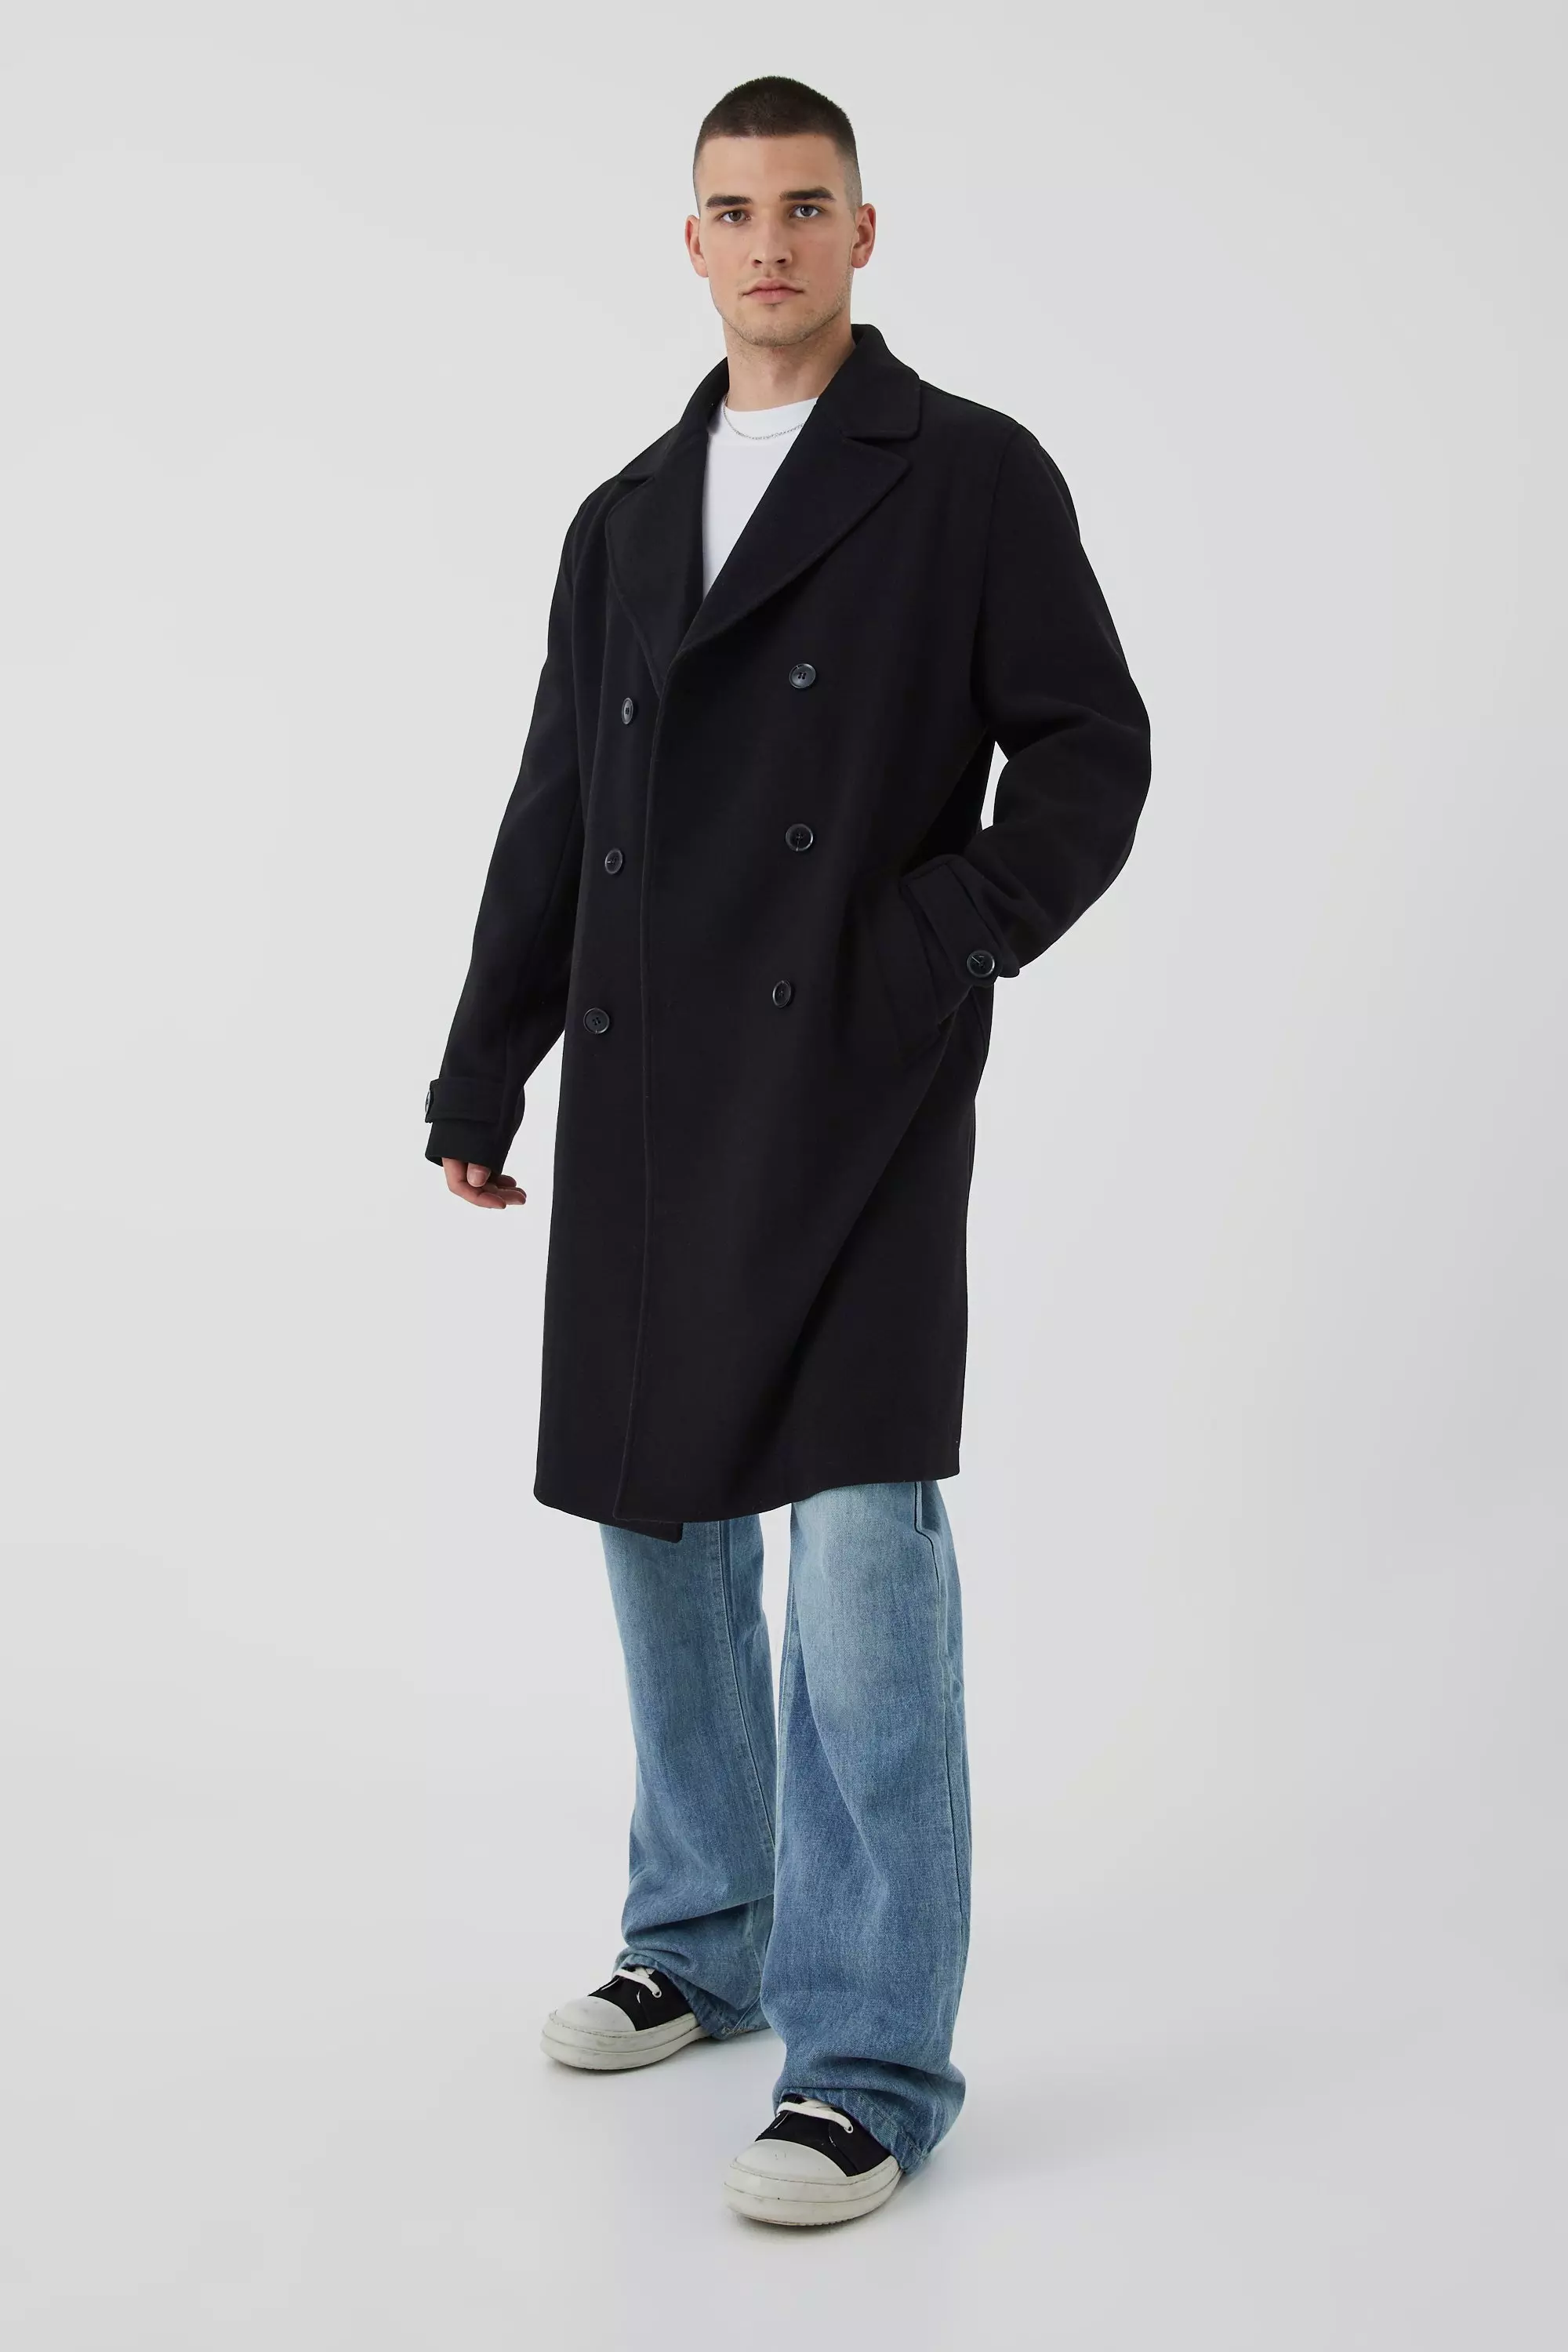 Black Tall Double Breasted Wool Look Overcoat in Black